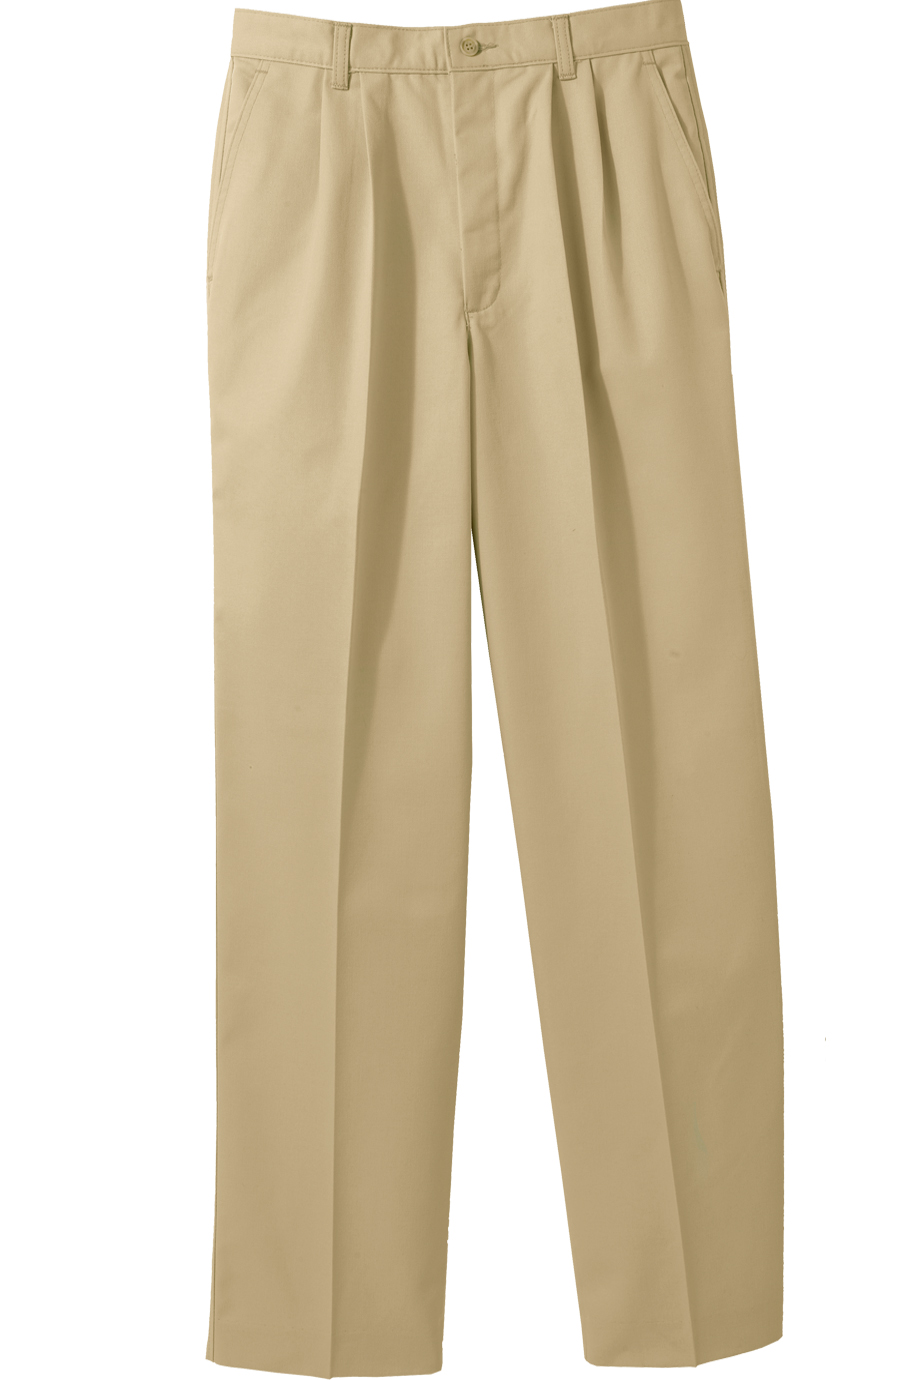 Edwards Big & Tall  Blended Chino Pleated Pant - Online Exclusive